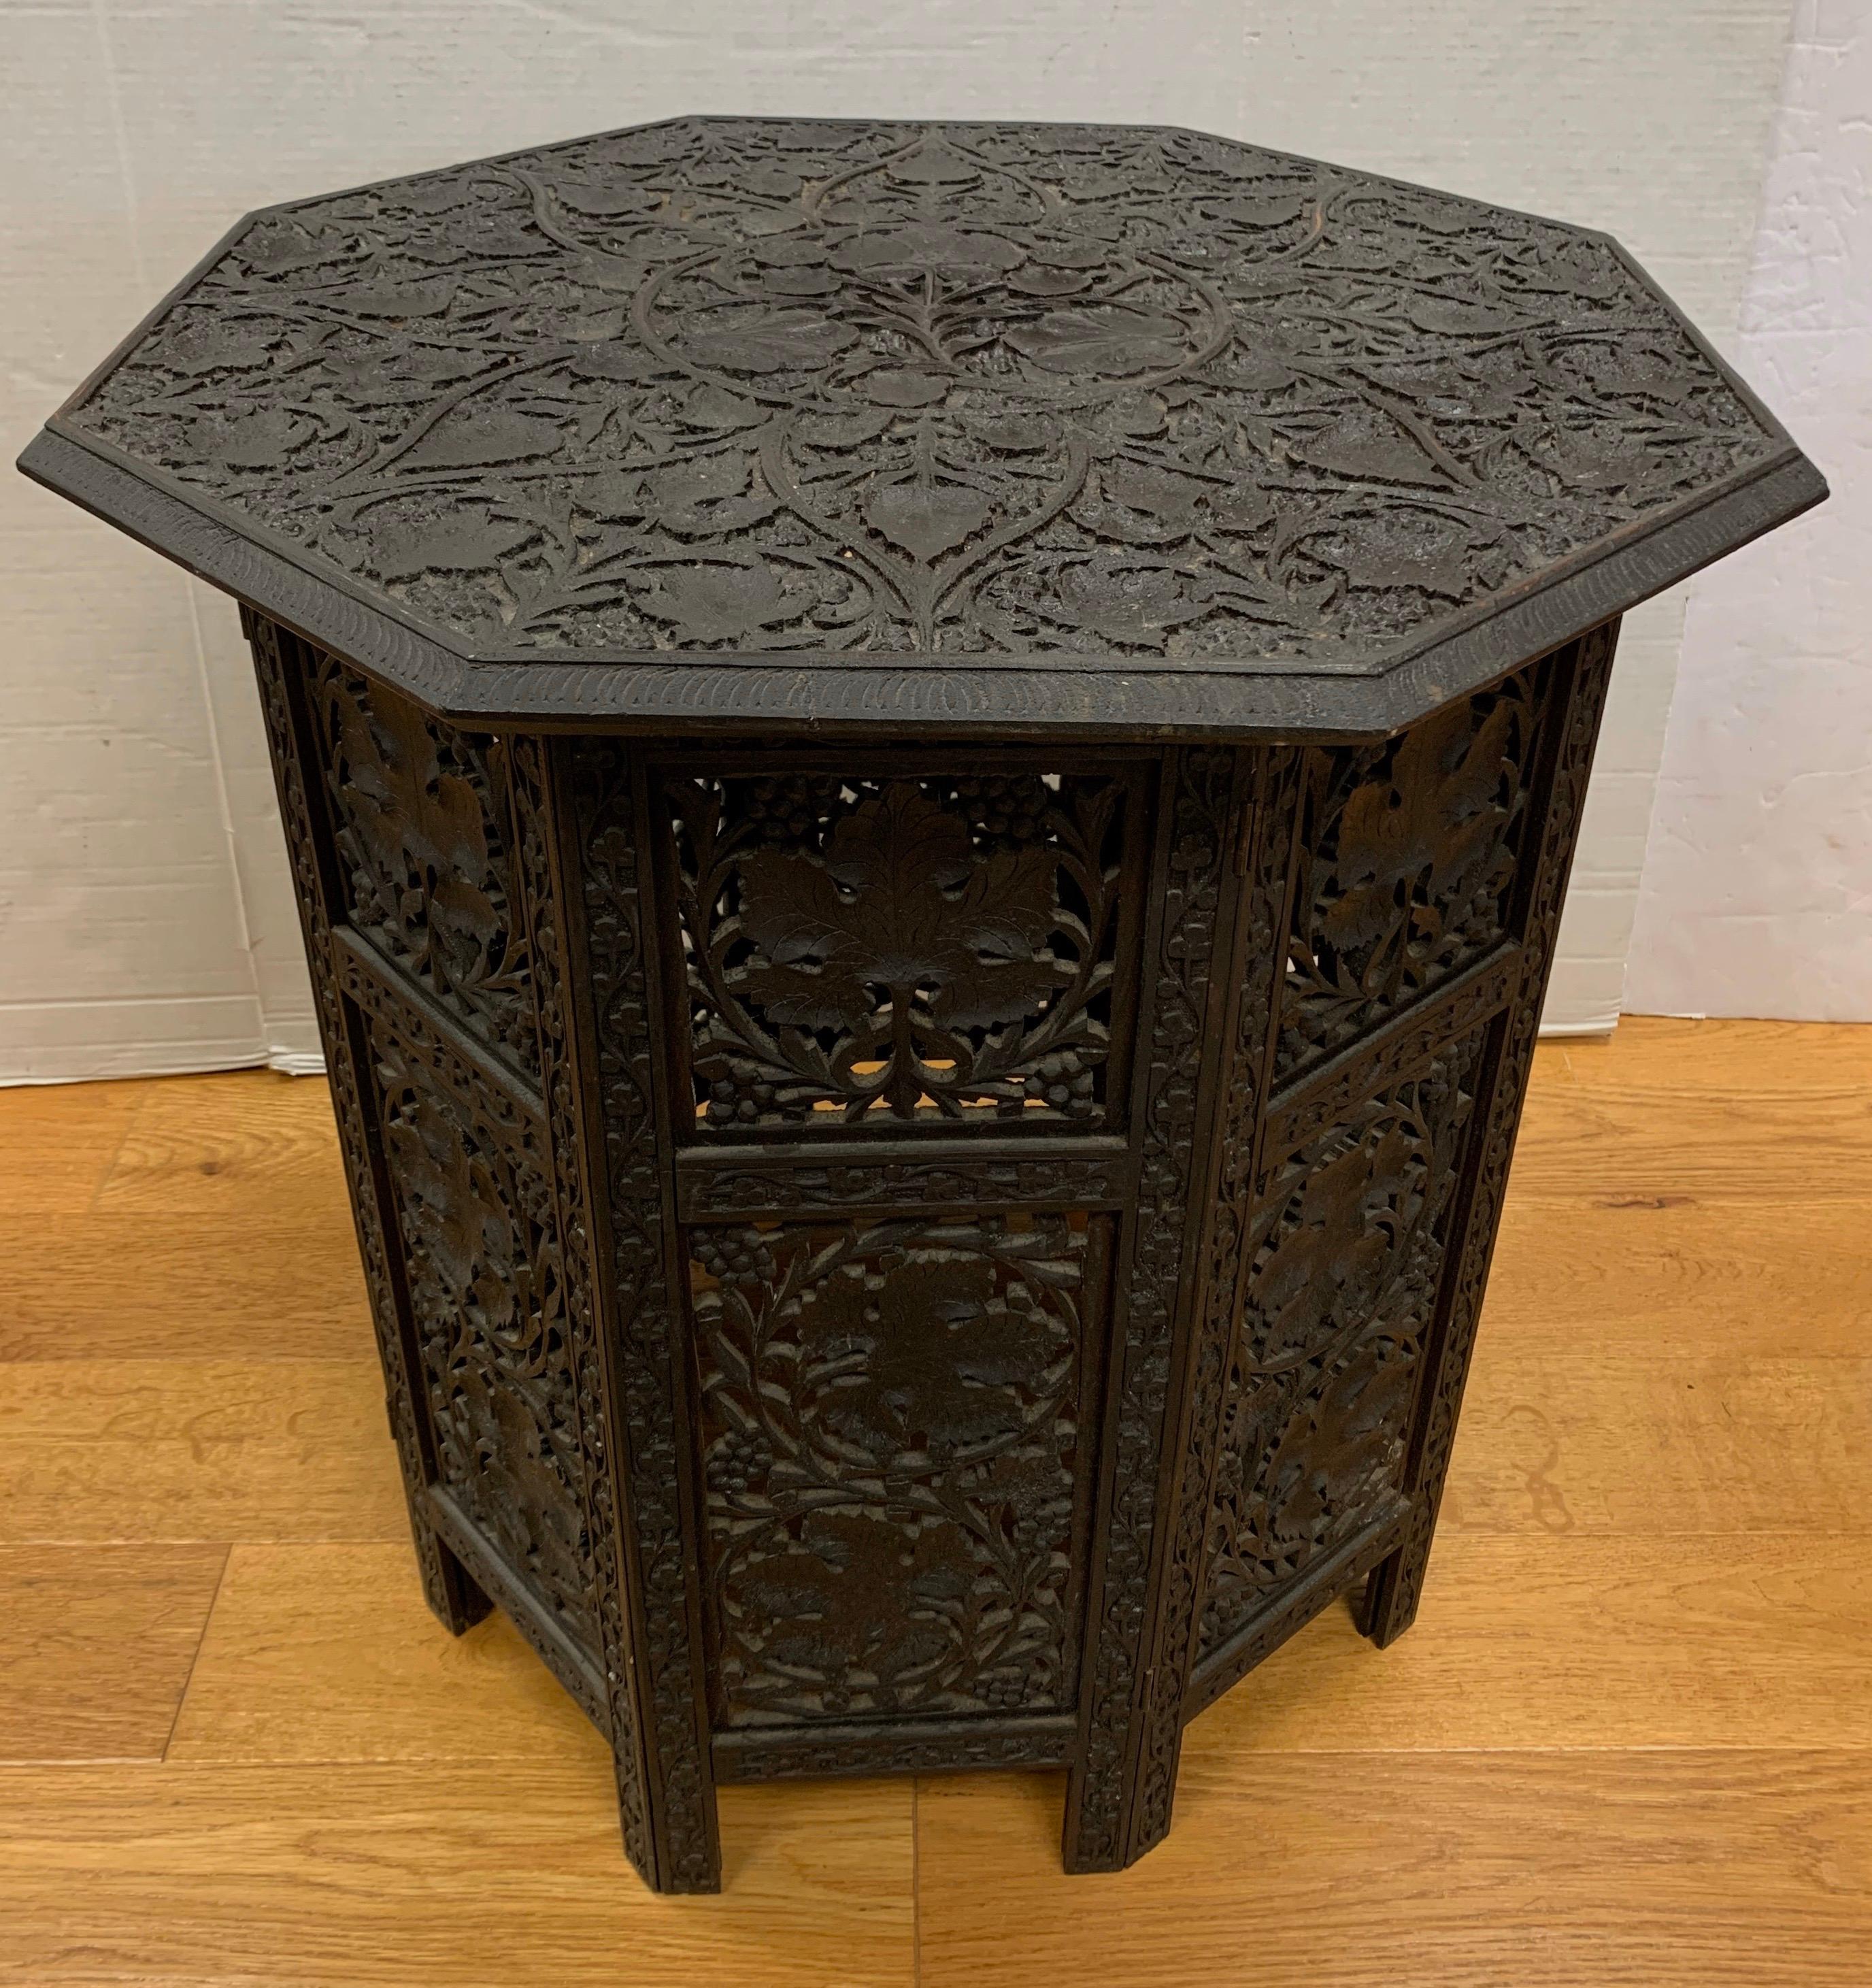 British Colonial Pair of Carved Anglo Indian Octagonal Folding Tables